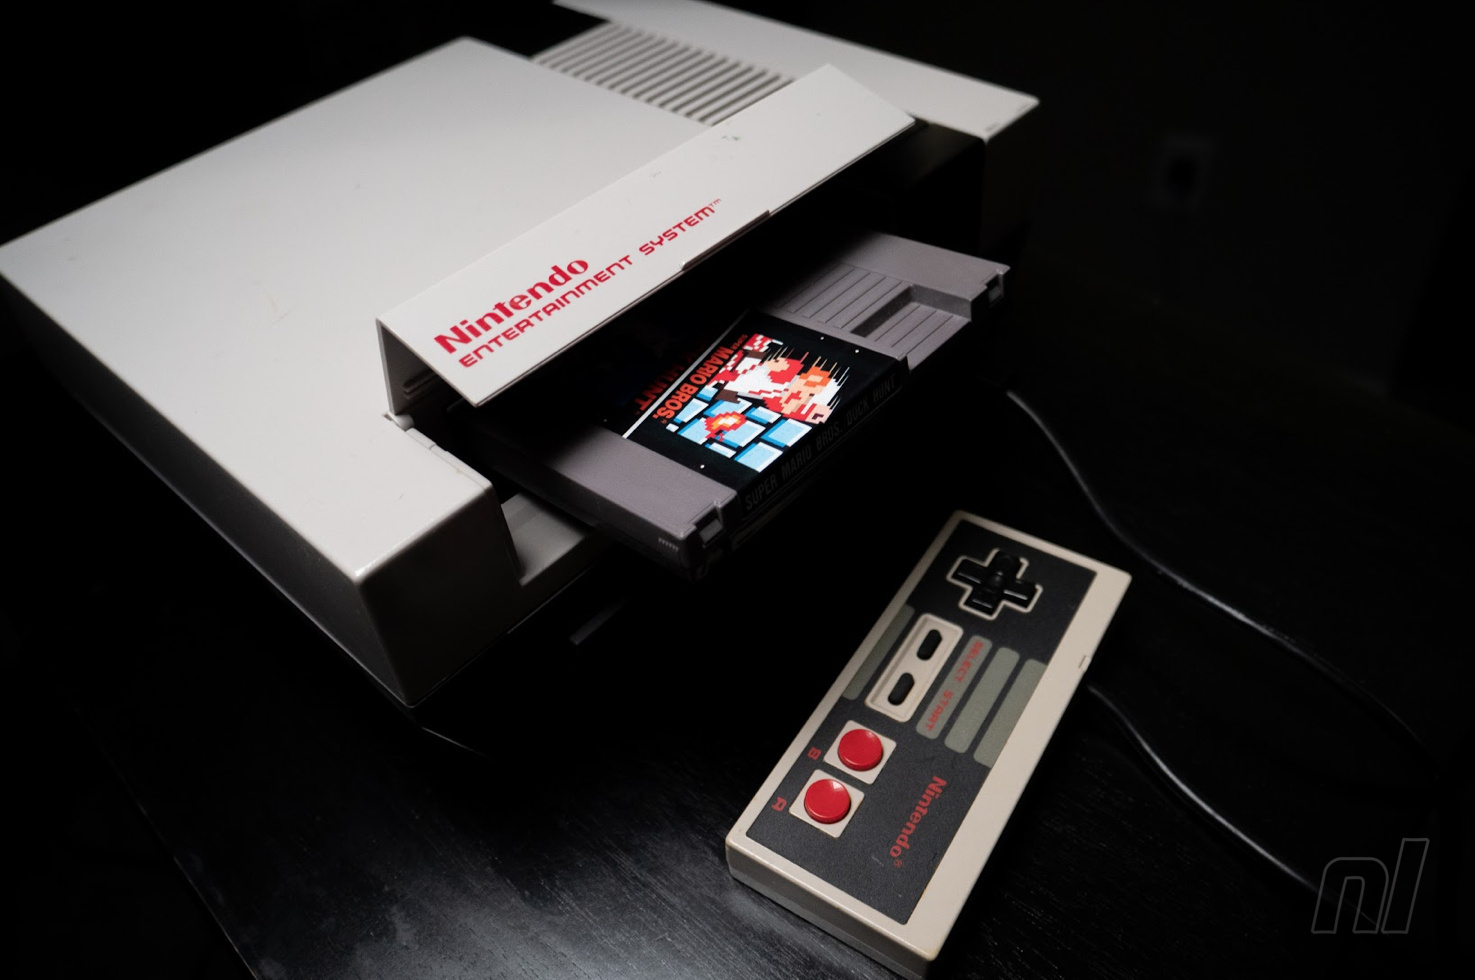 barrs-design-for-the-nes-remains-legendary-he-later-designed-the-top-loaded-update-of-that-console.original.jpg